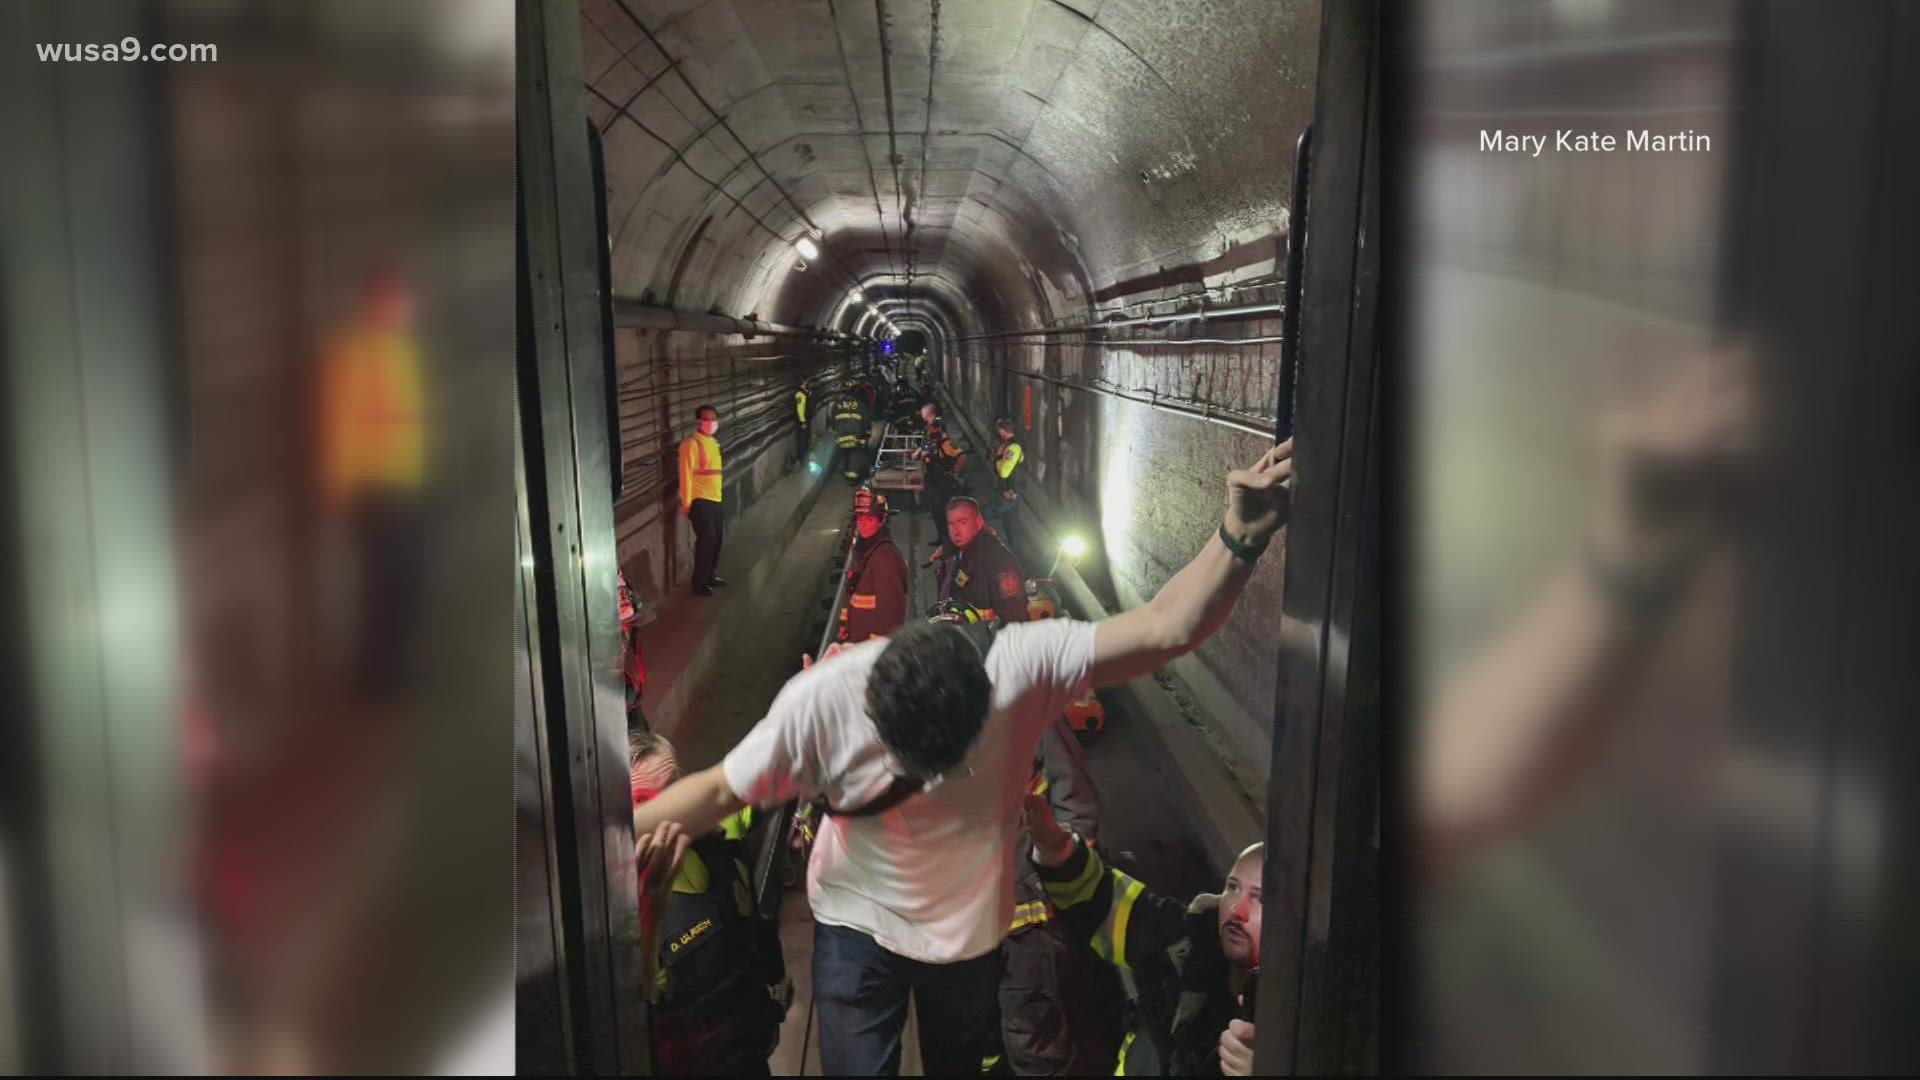 WMATA says riders should expect intermittent delays while the investigation into the Tuesday derailment continues.